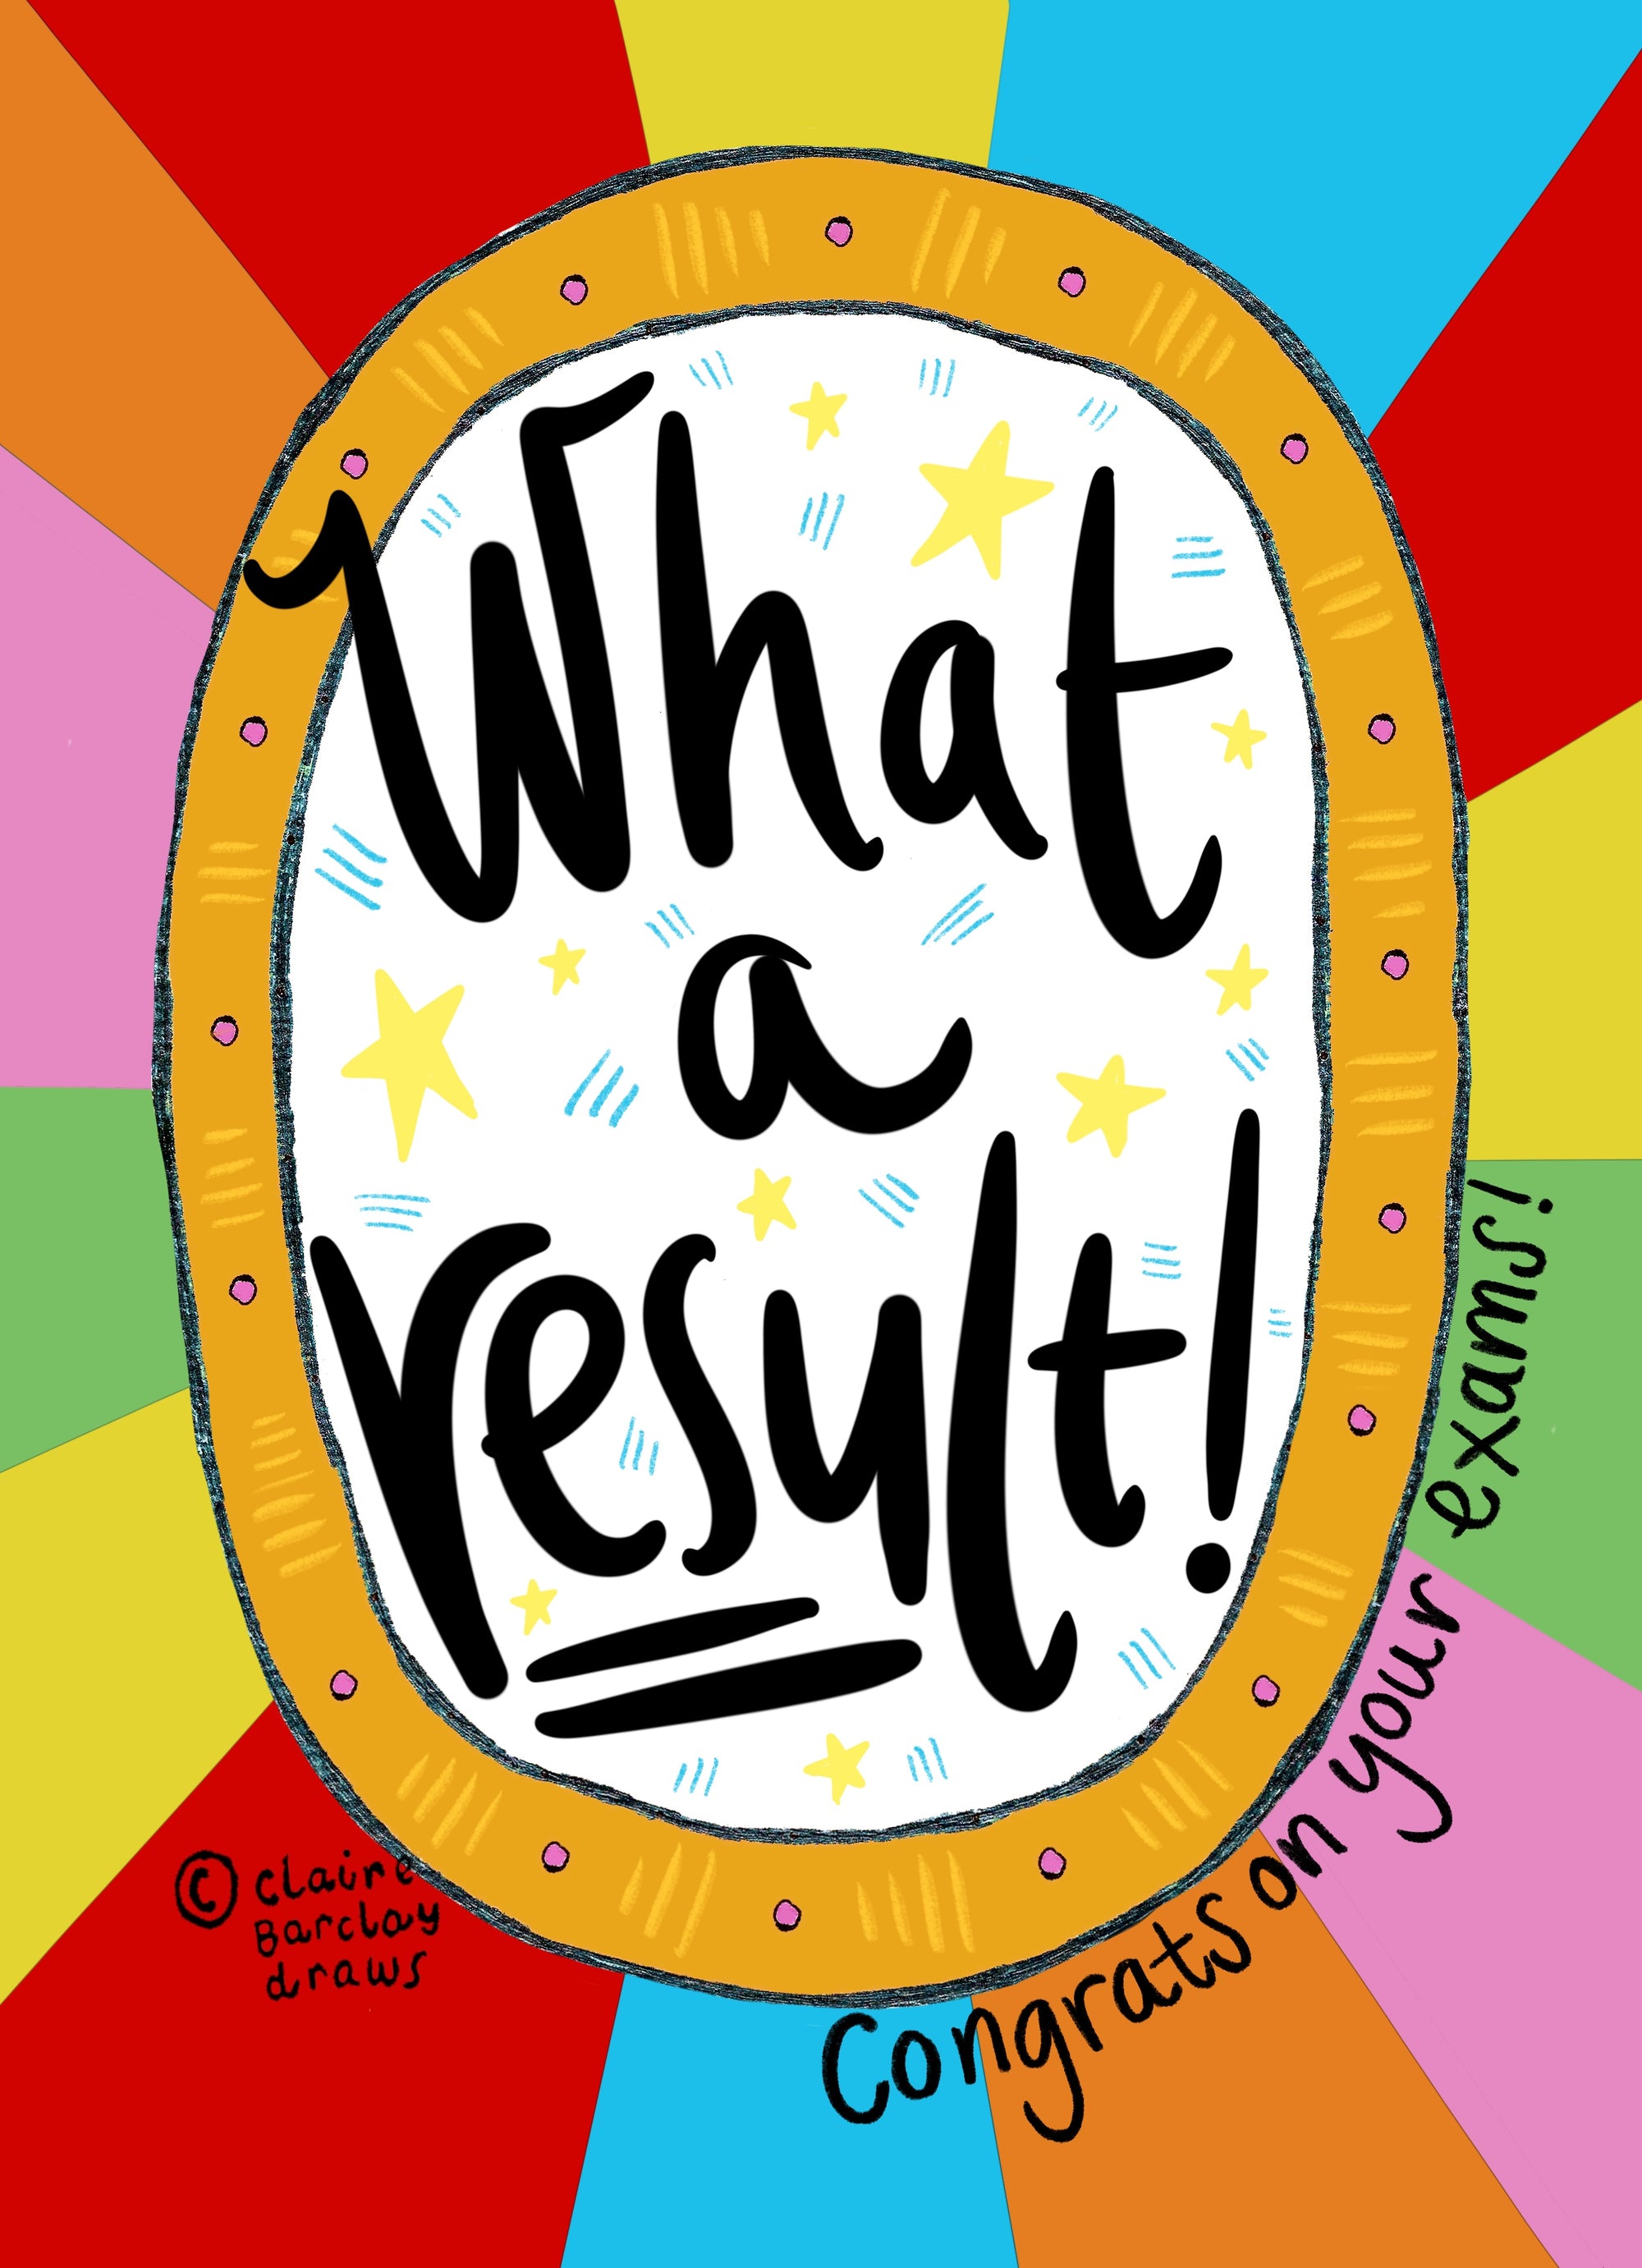 A greetings card with a rainbow sunbeam designed background with a large white circle motif in the middle that has the words handwritten 'what a result!'. Around the bottom right of the central motif are the words 'congrats on your exams'.